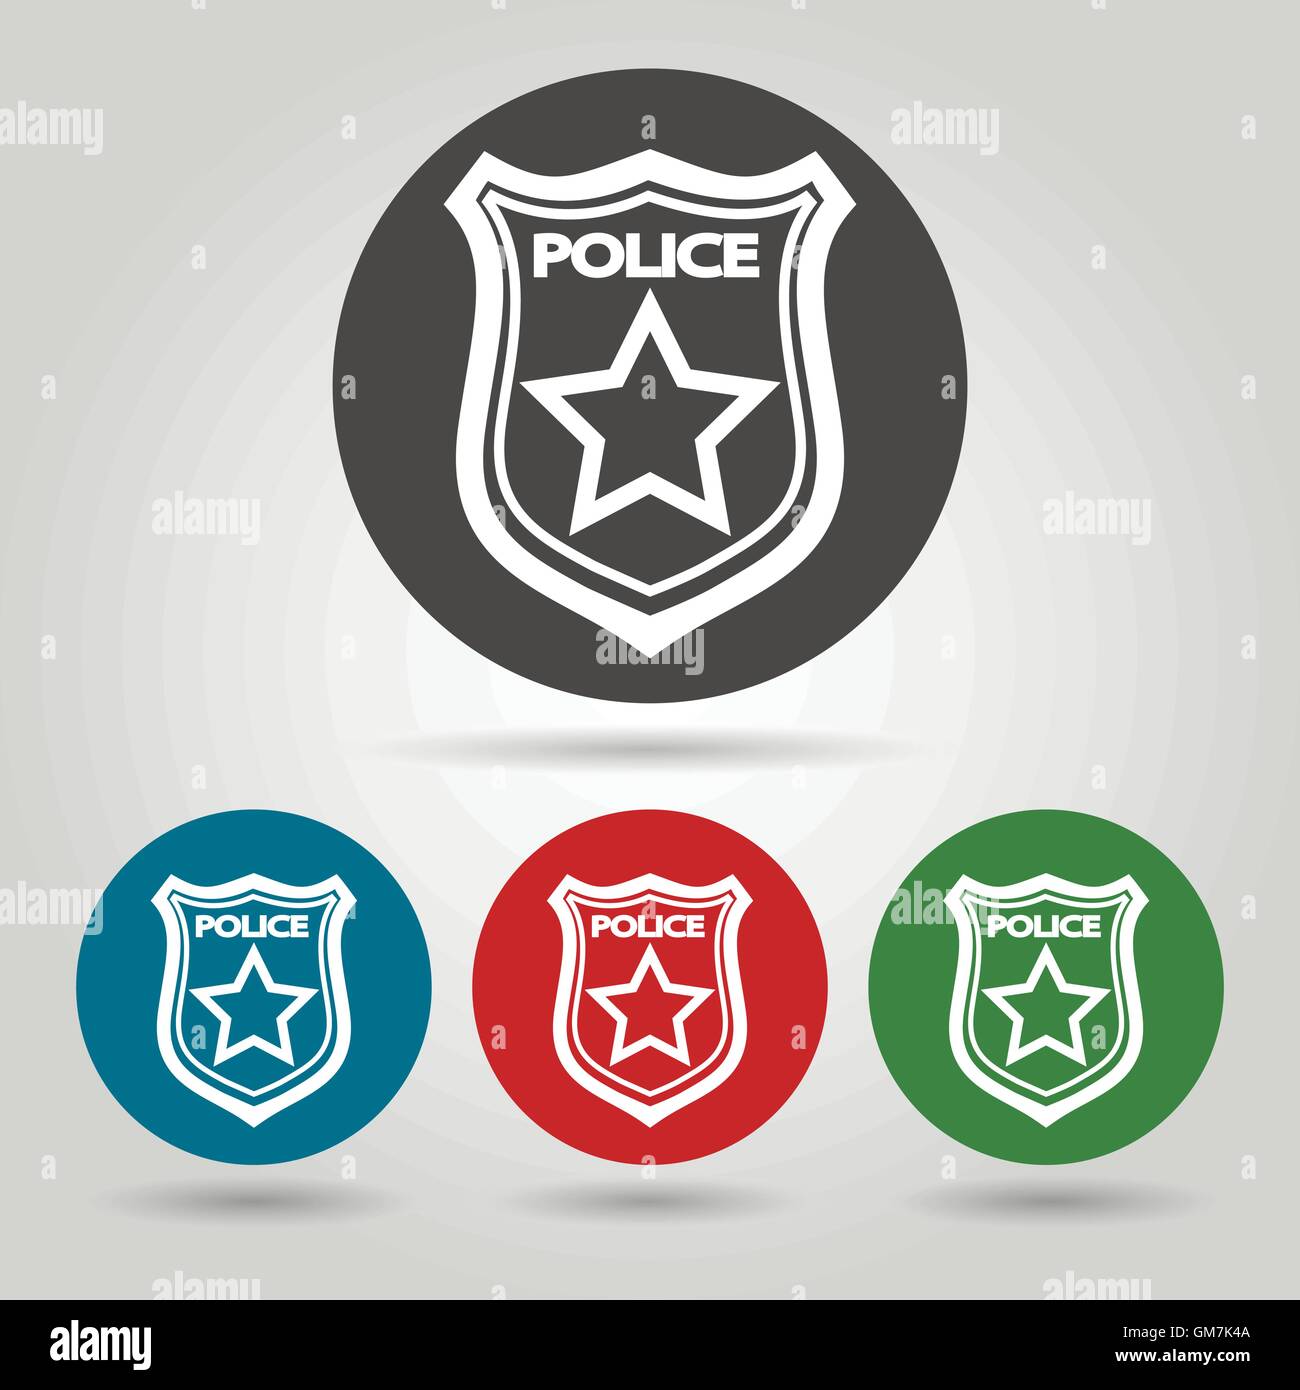 Police badge symbol set. Flat icons on colorful backgrounds. Stock Vector